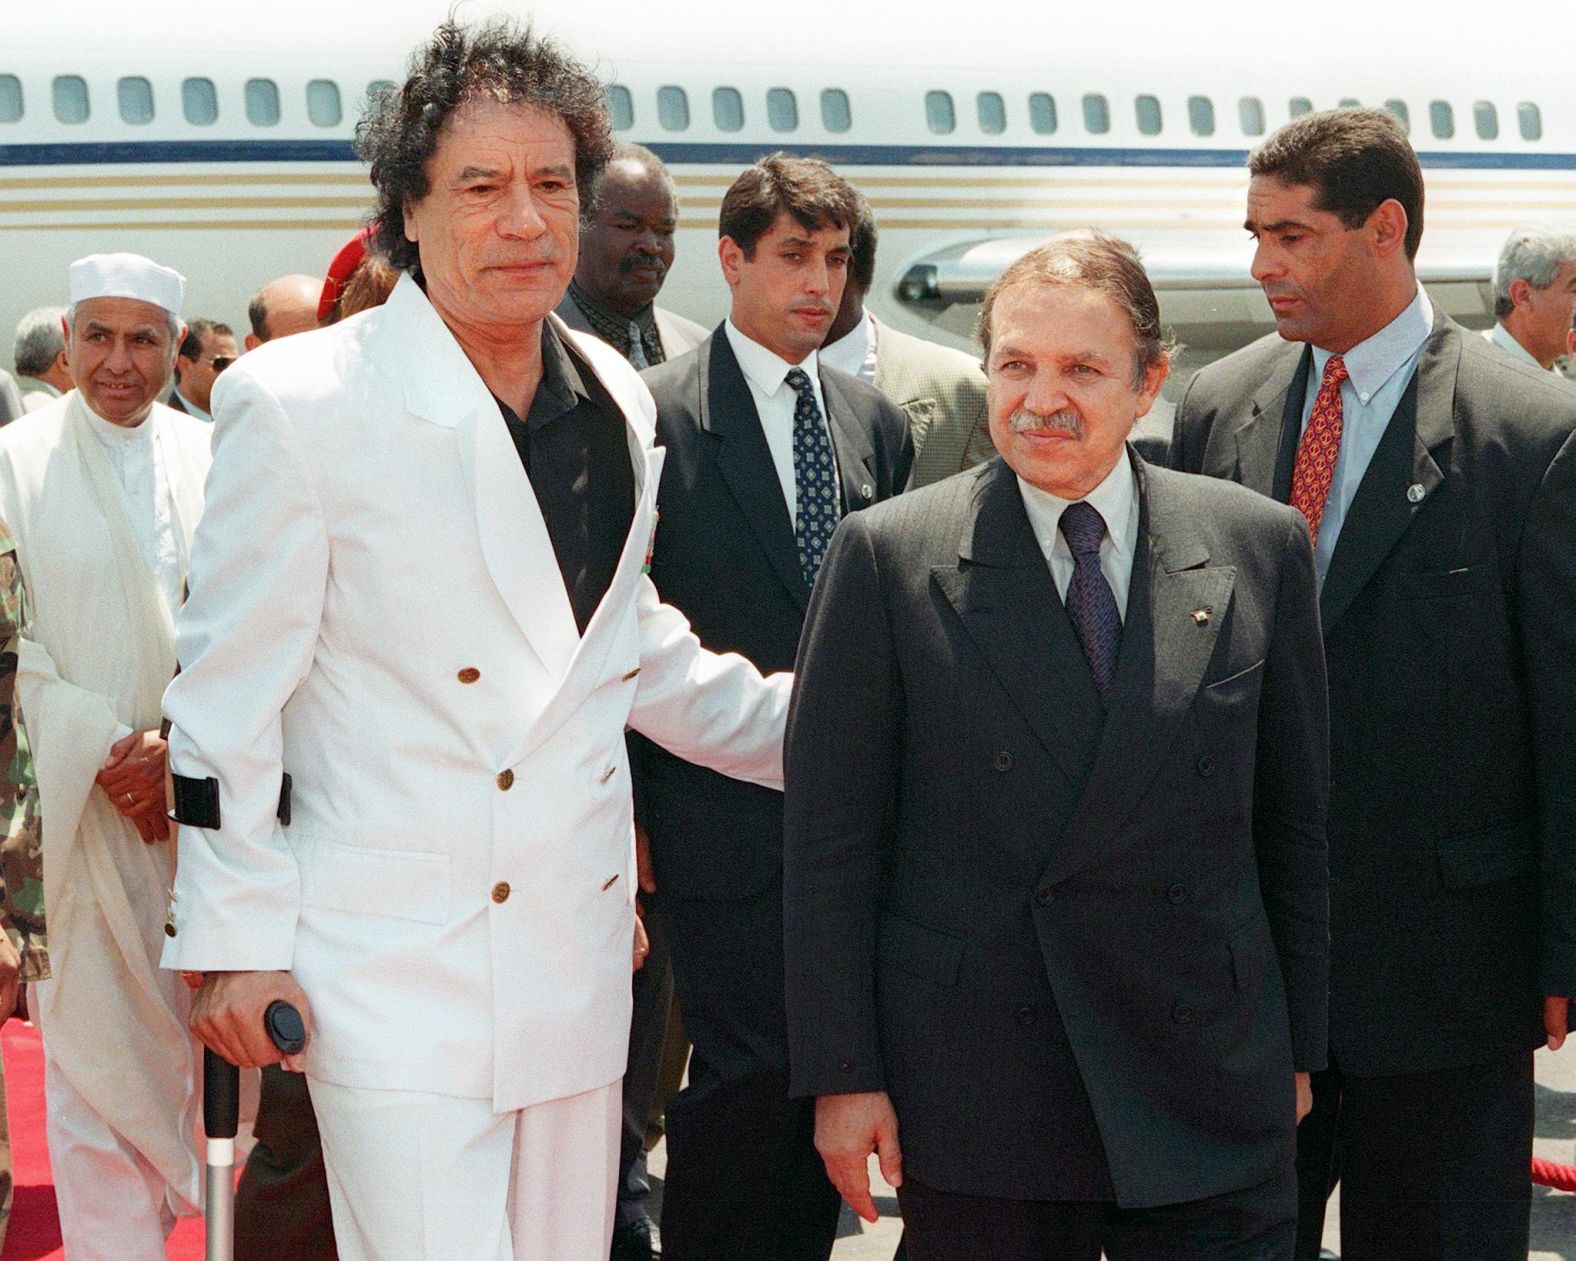 Libyan leader Moammar Gadhafi walks with newly elected President Bouteflika at the Organization of African Unity summit in Algiers in July 1999.